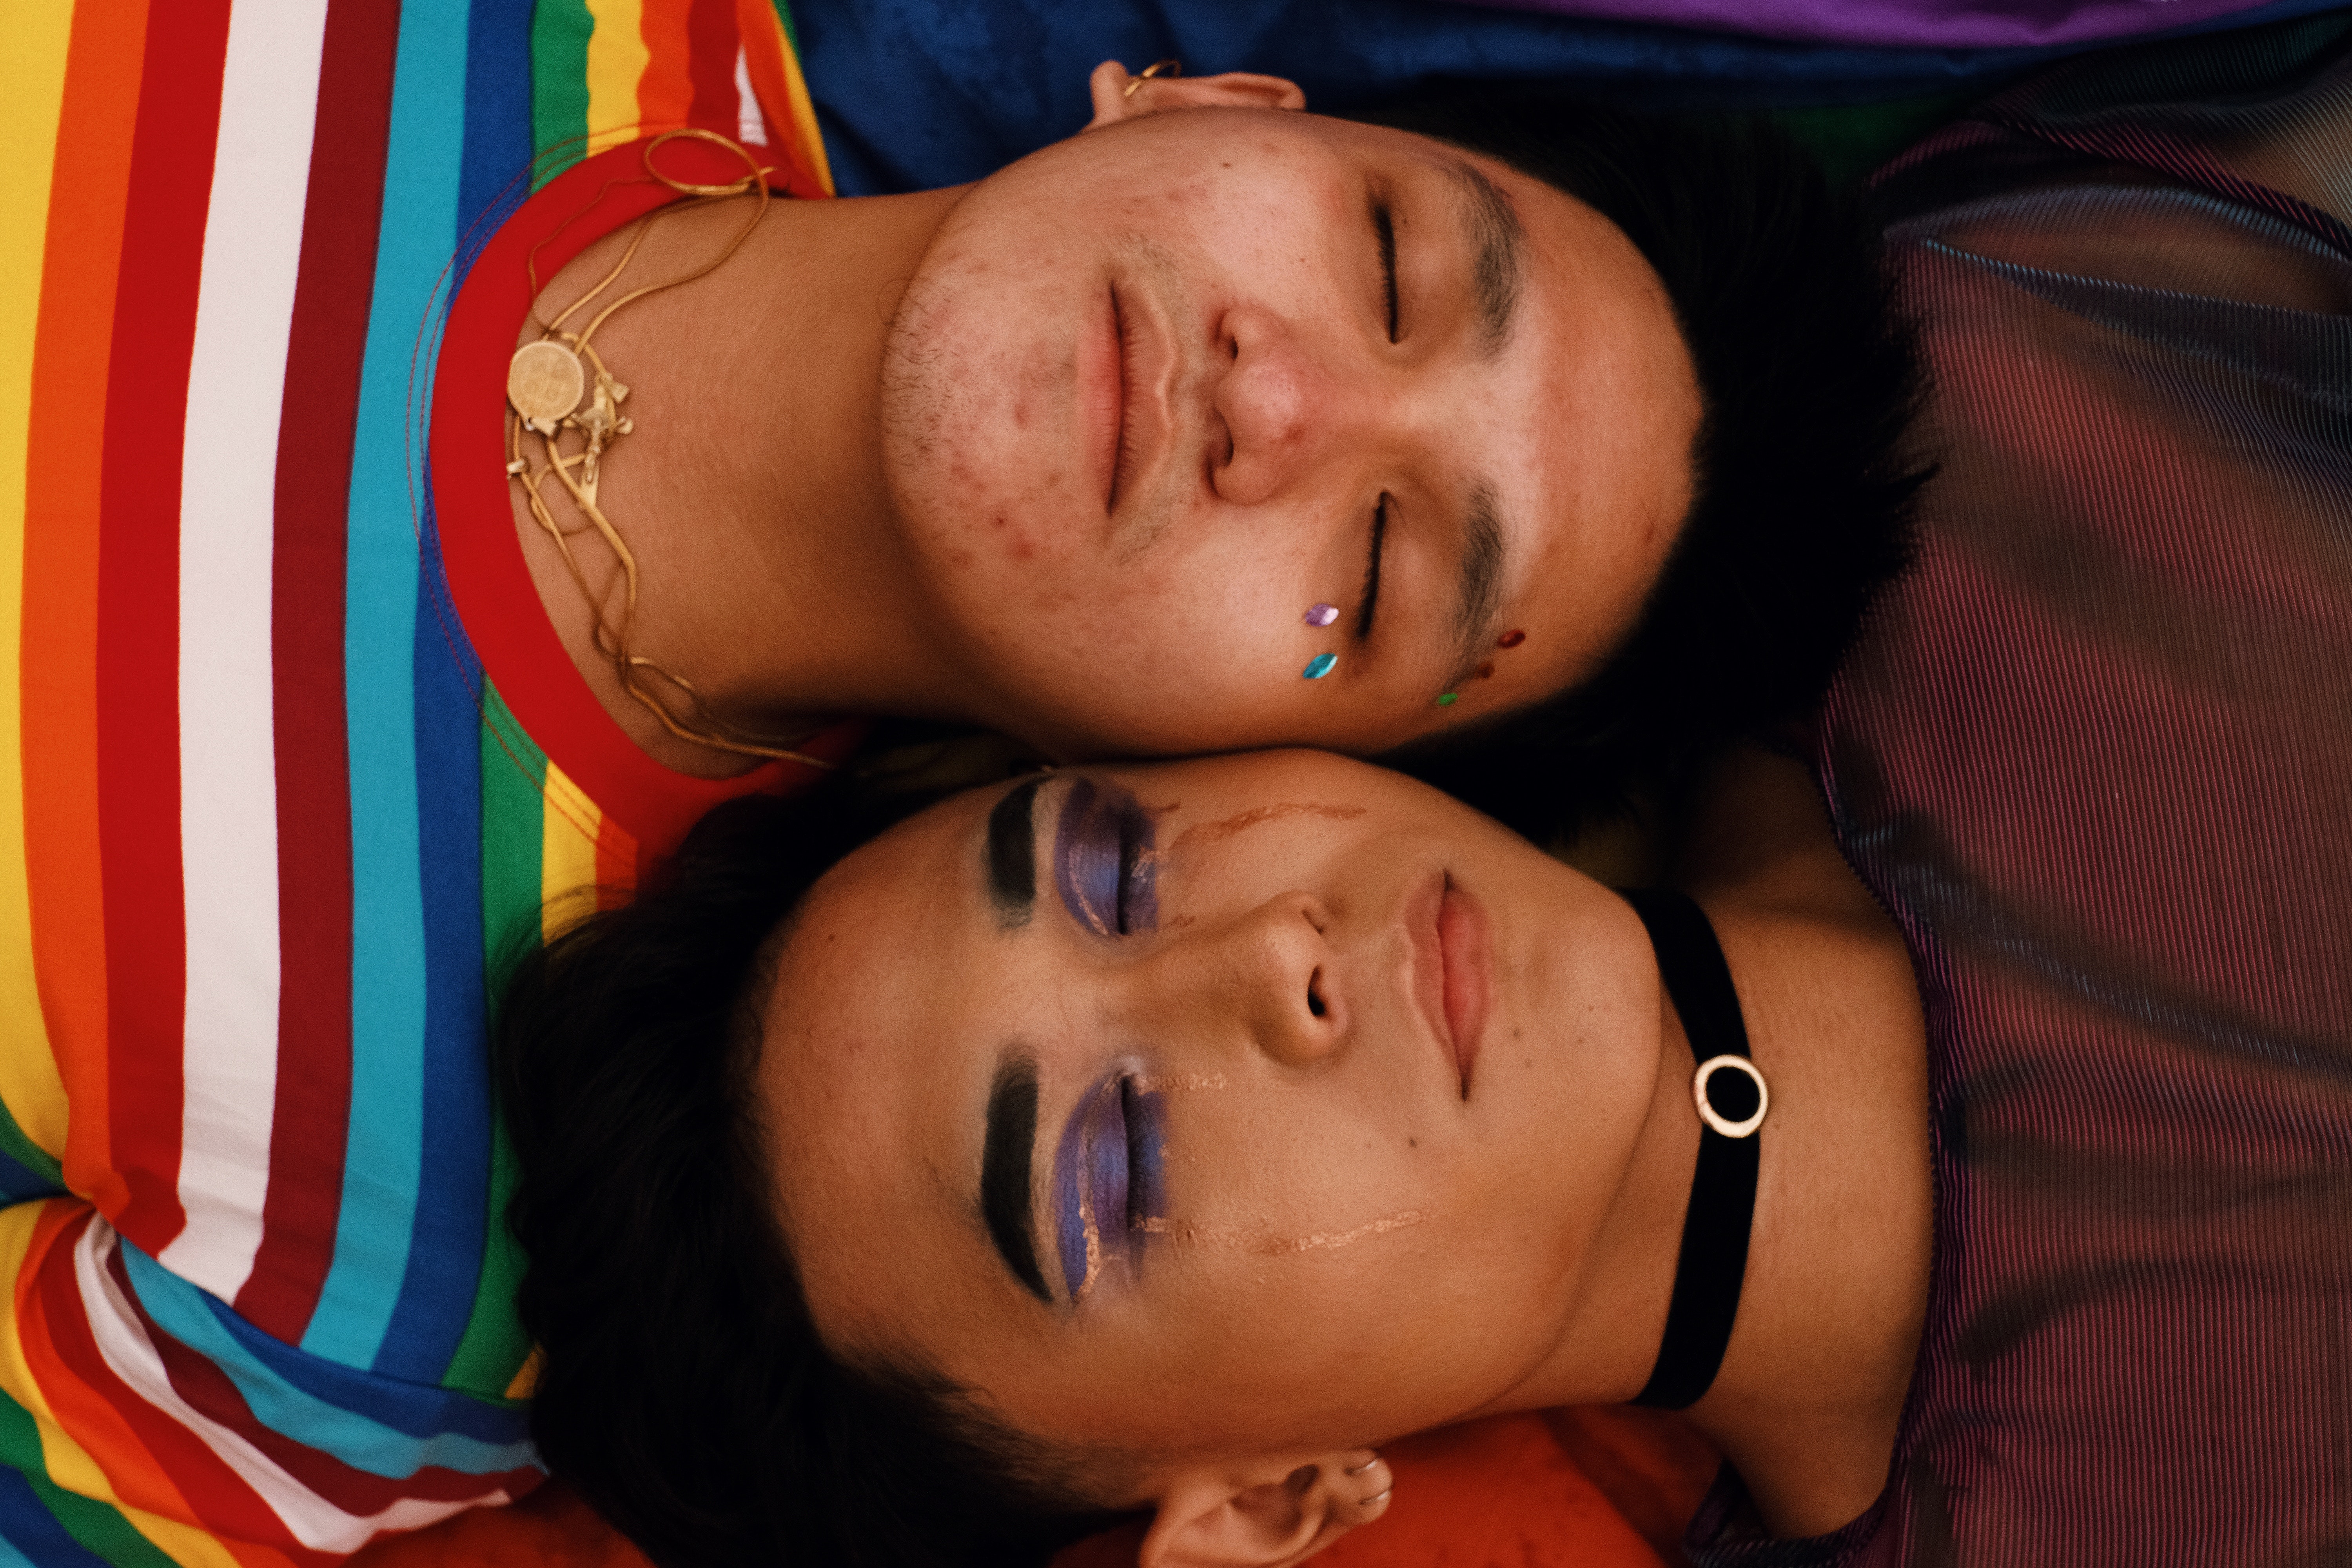 Two bi racial friends lay in the floor with their heads touching and their eyes closed wearing colorful clothing.